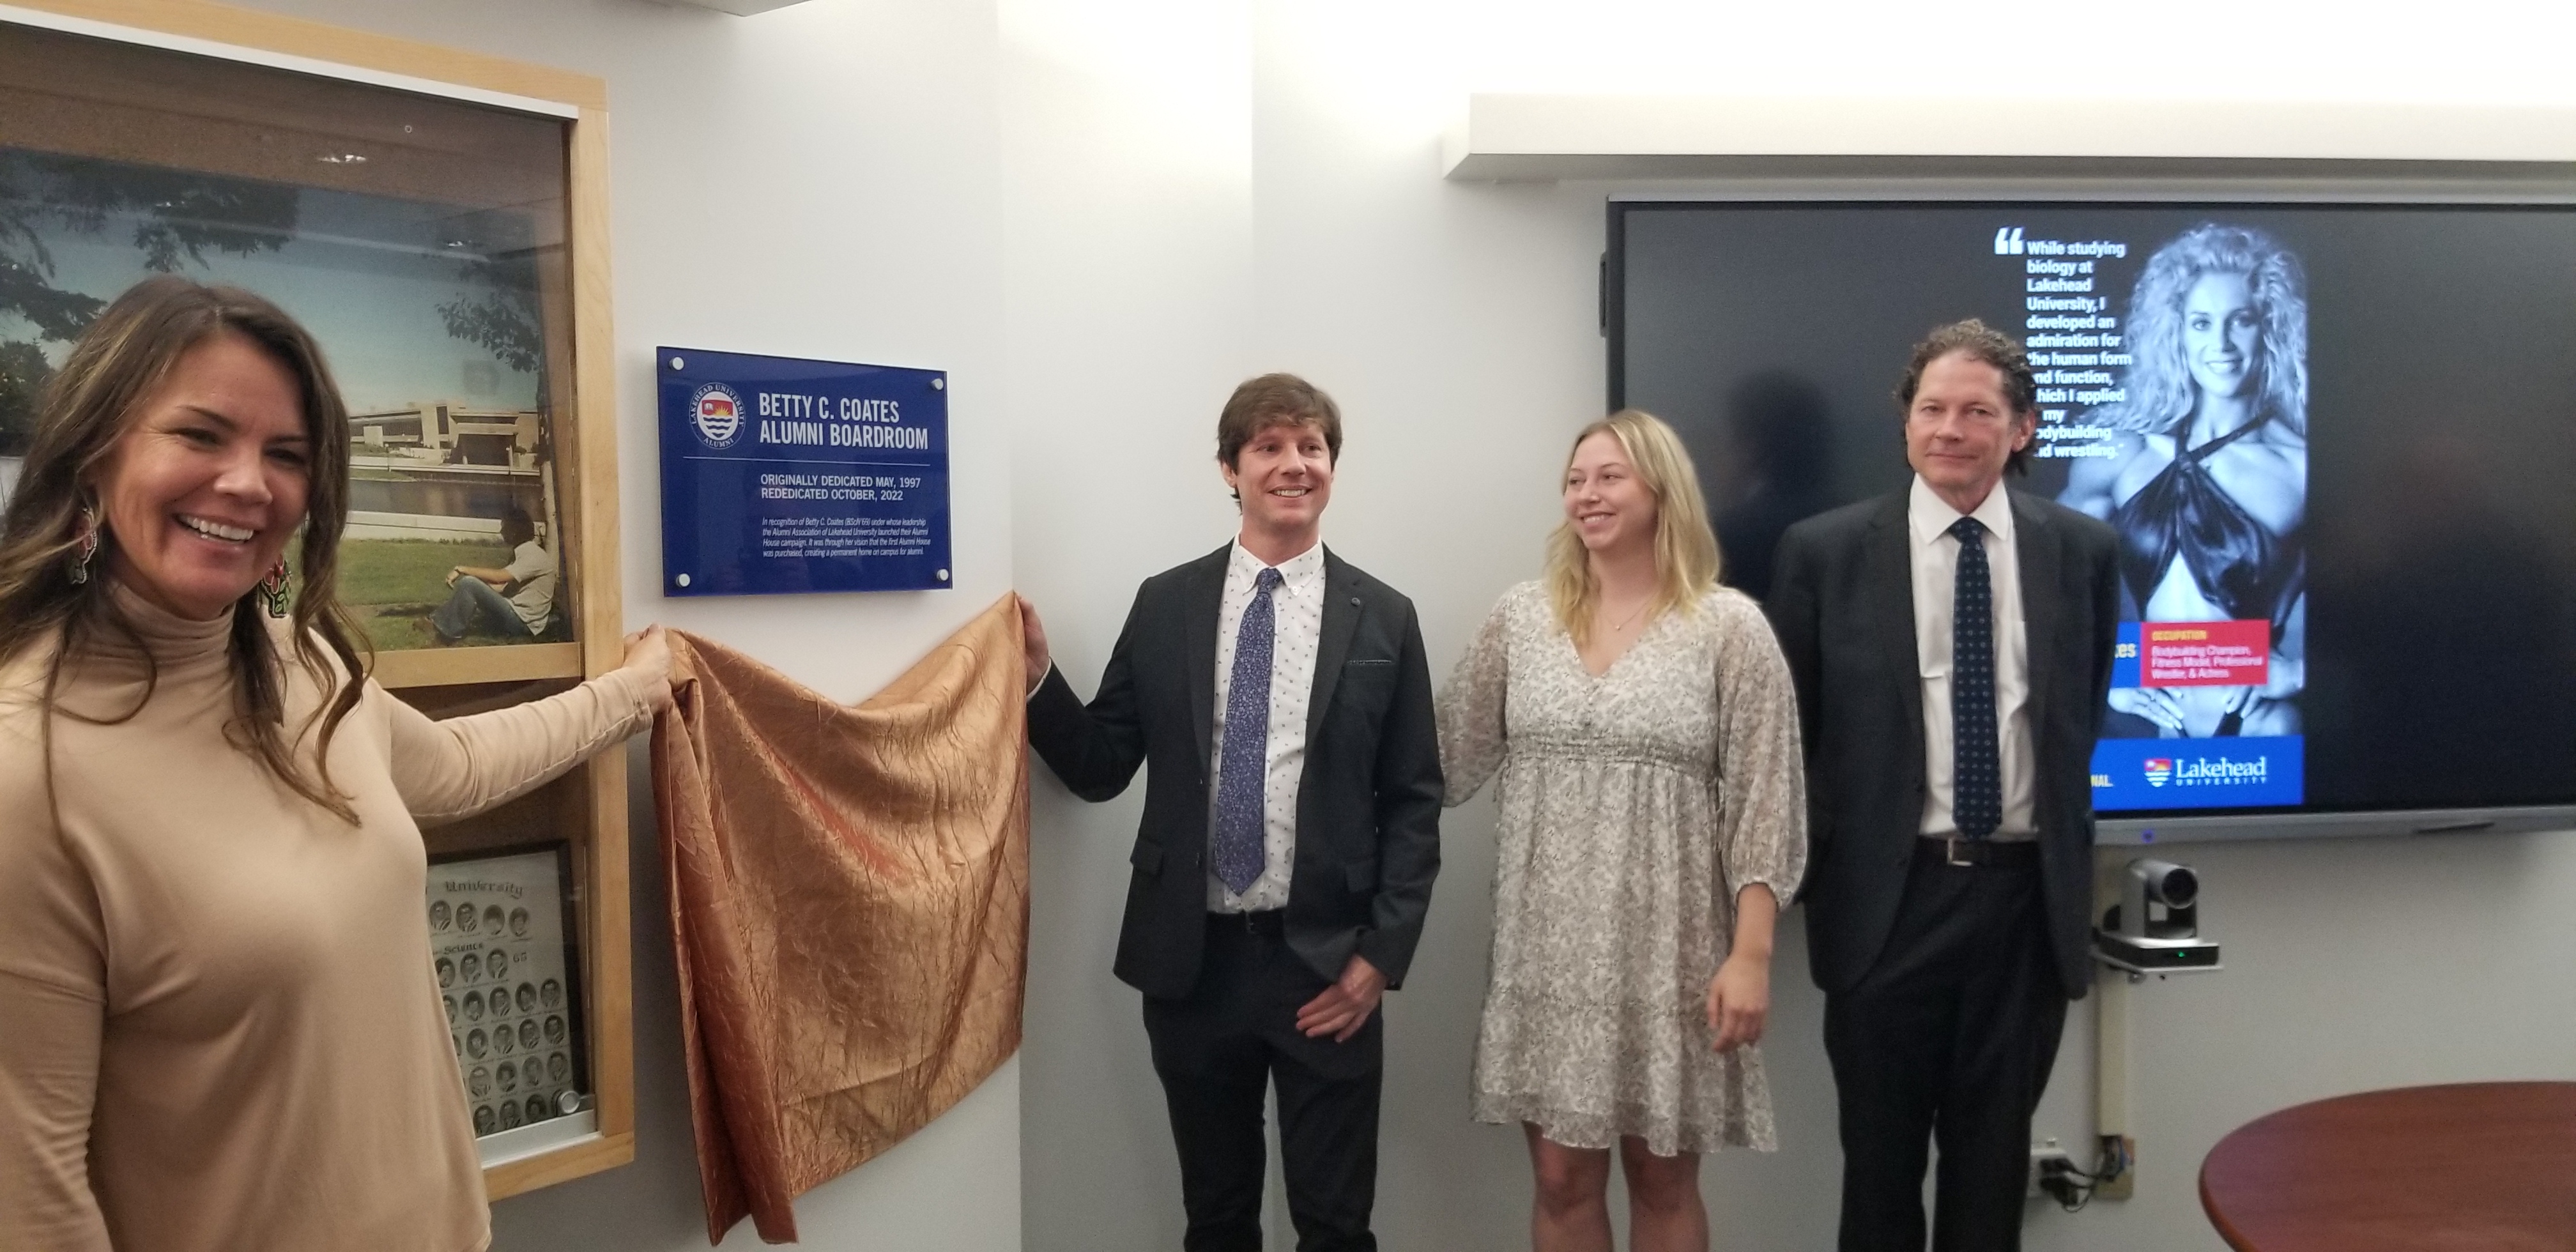 Unveiling the plaque commemorating the Betty C. Coates Boardroom